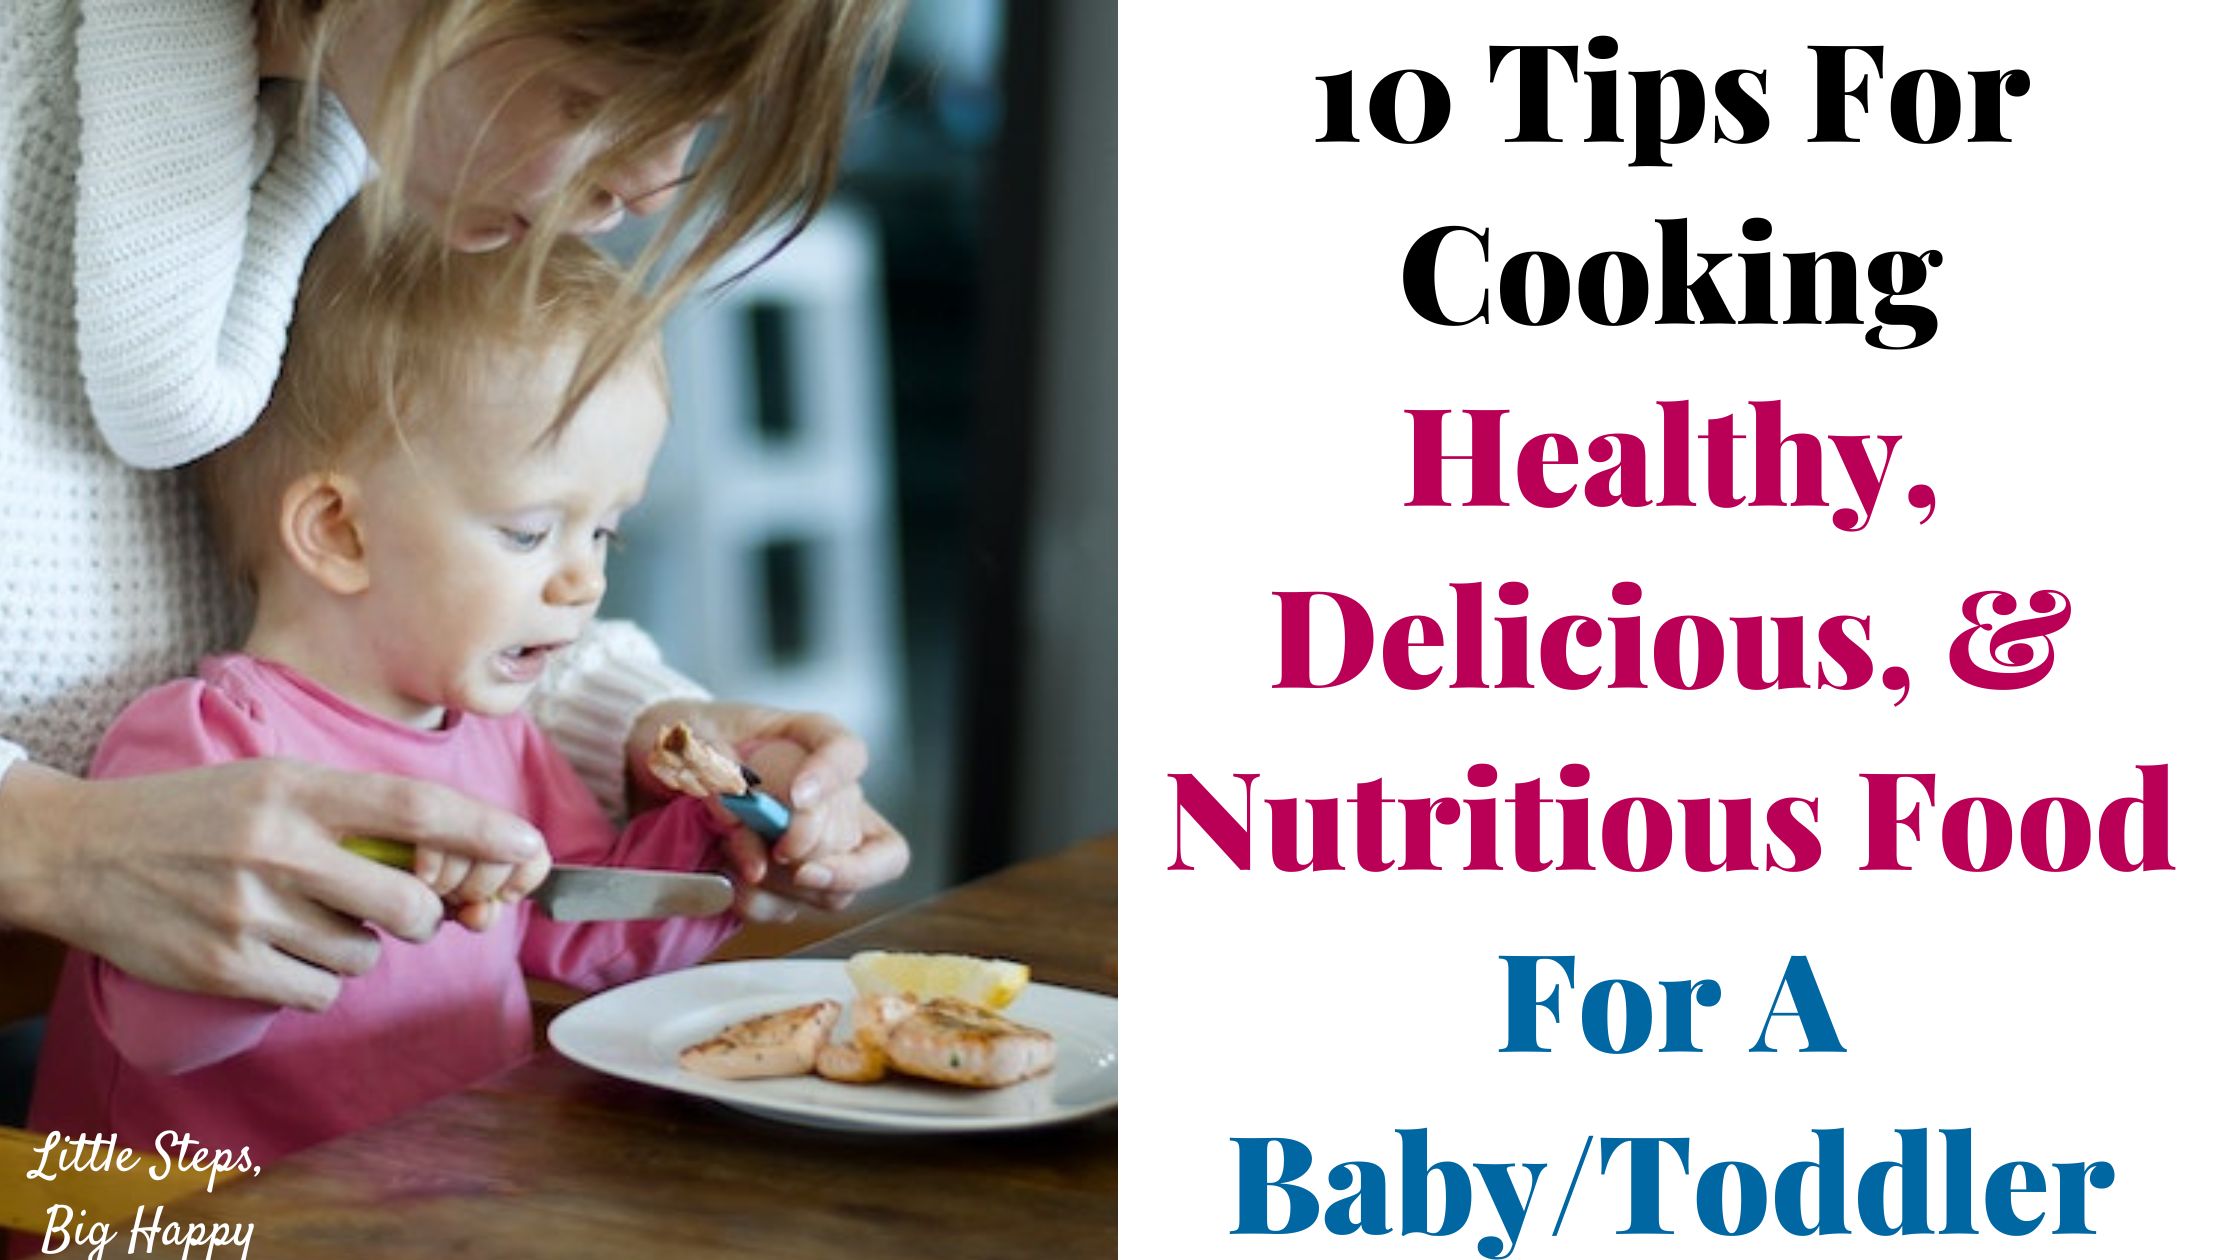 Woman helping her child eat. Text says: 10 Tips for Cooking Healthy, Delicious, & Nutritious Food for a Baby/Toddler